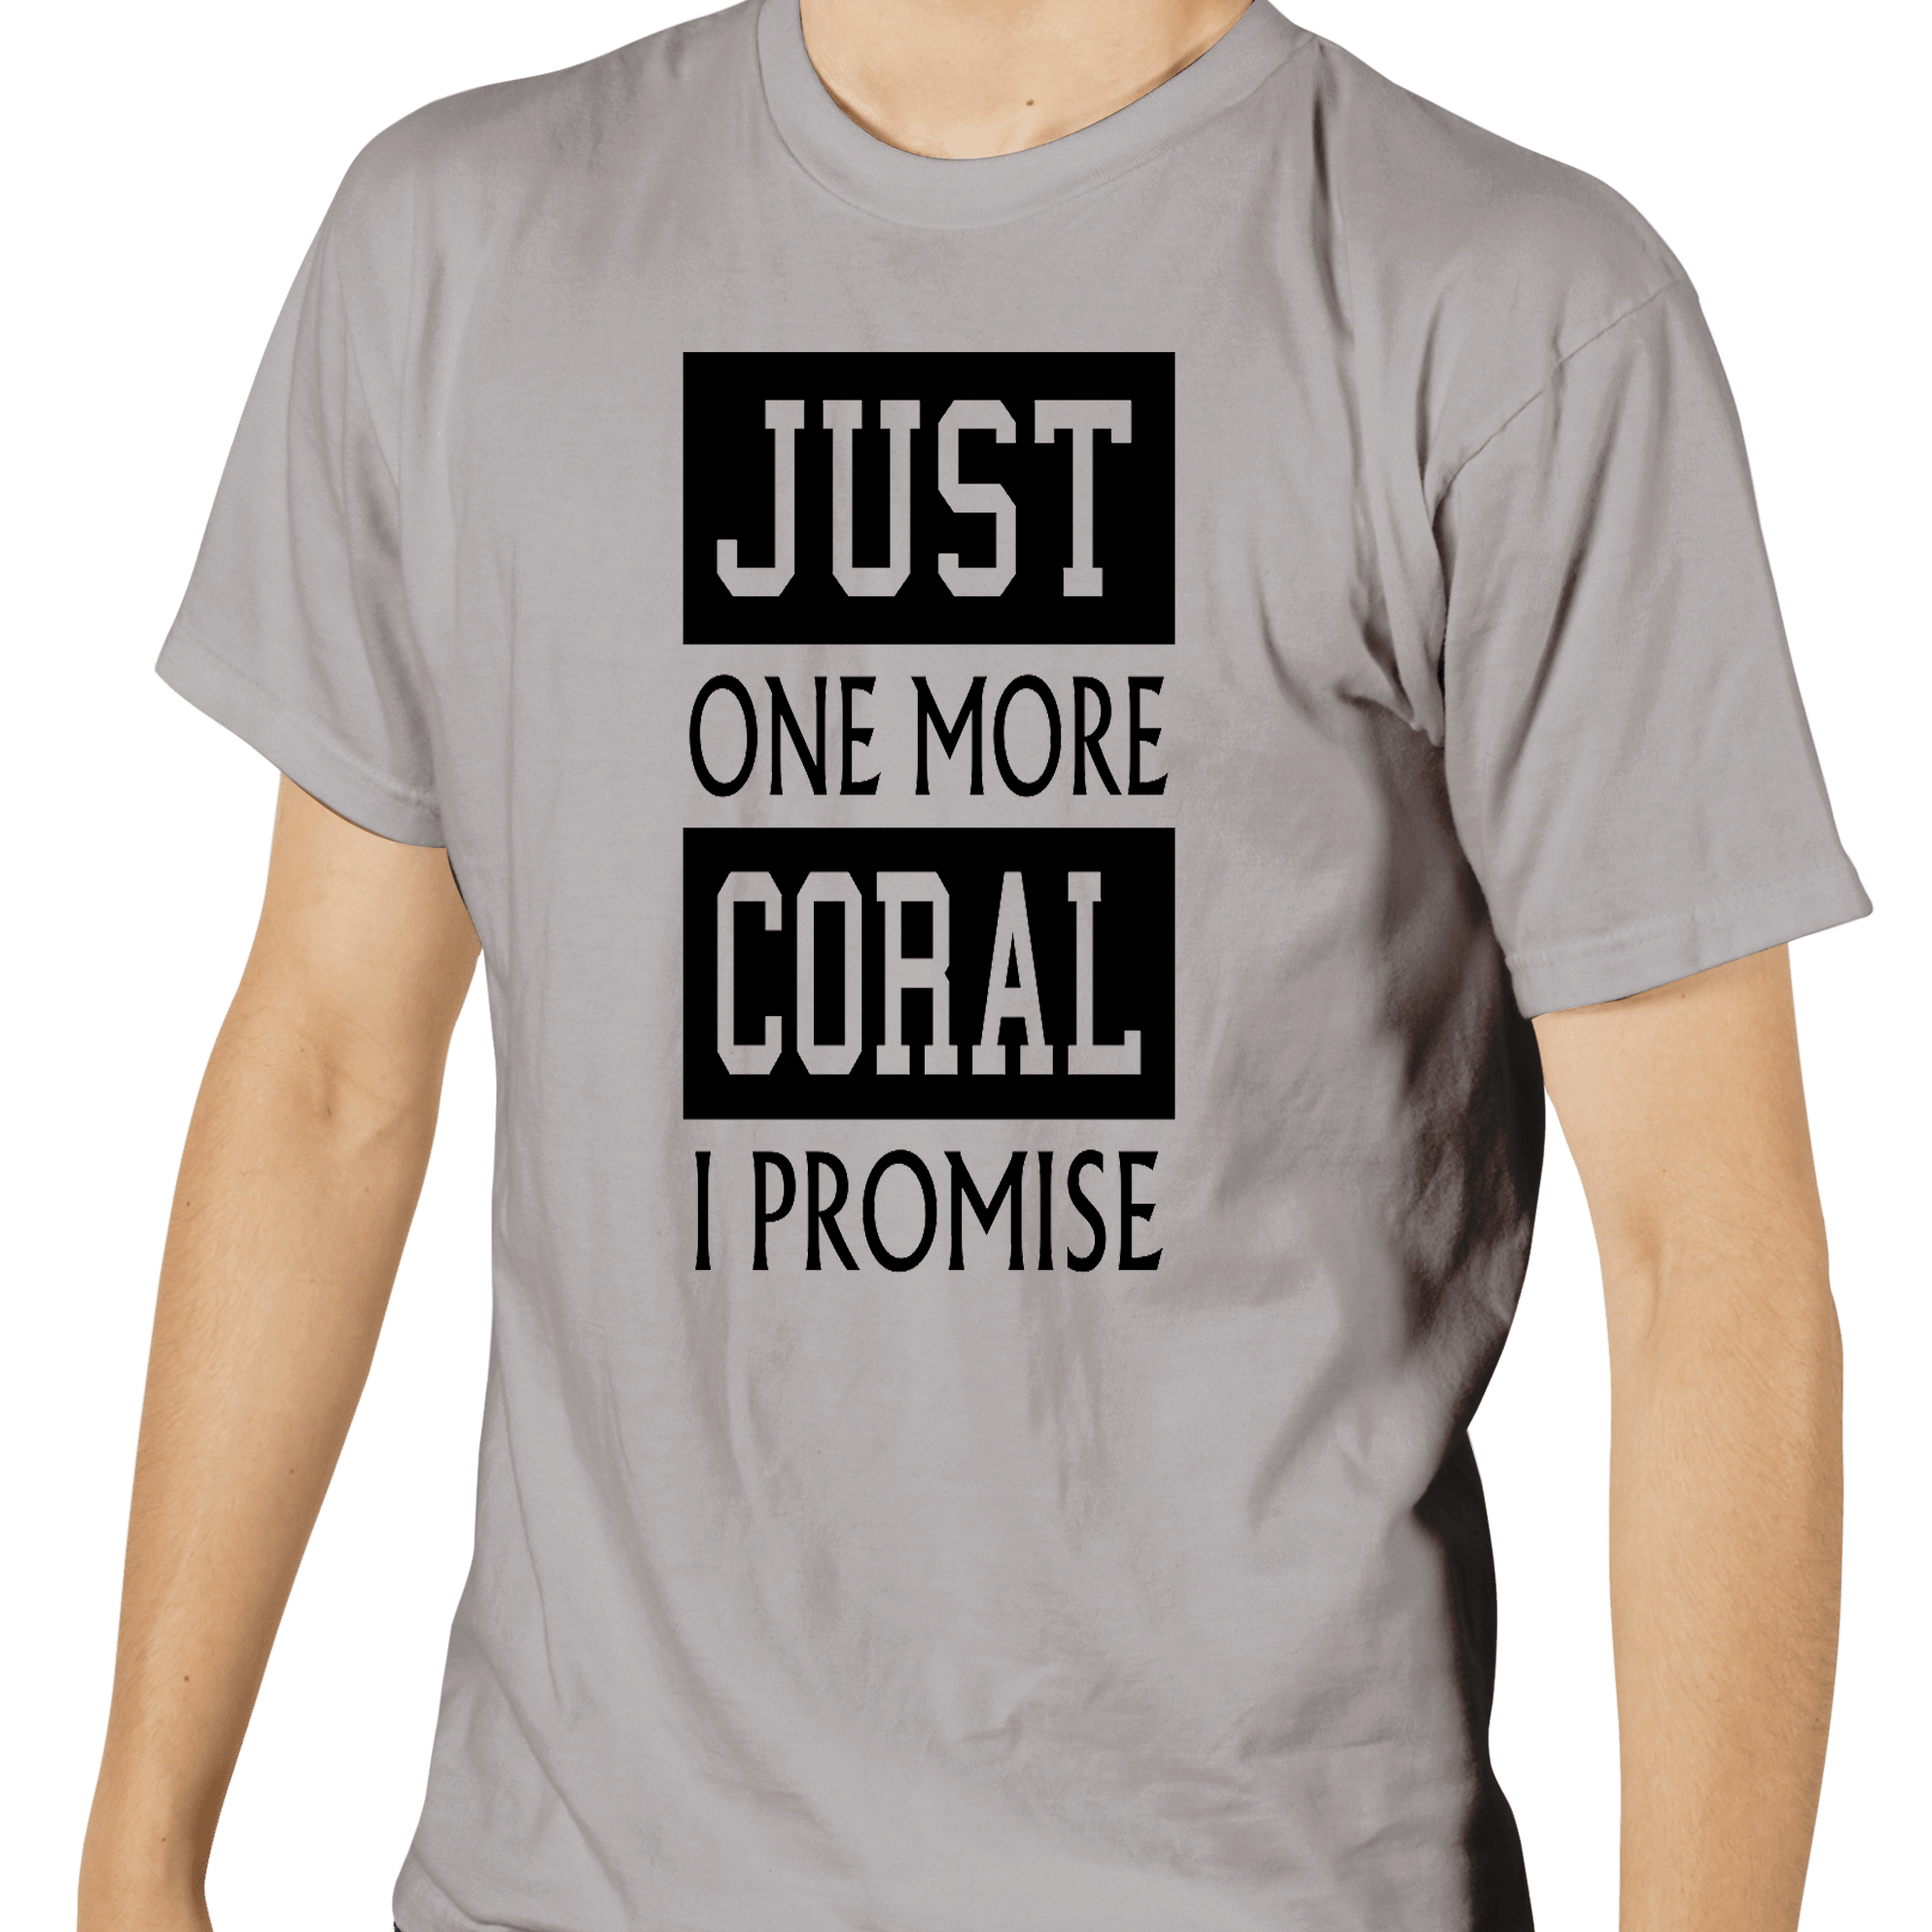 Just One More Coral I Promise T-Shirt Grey - SaltCritters